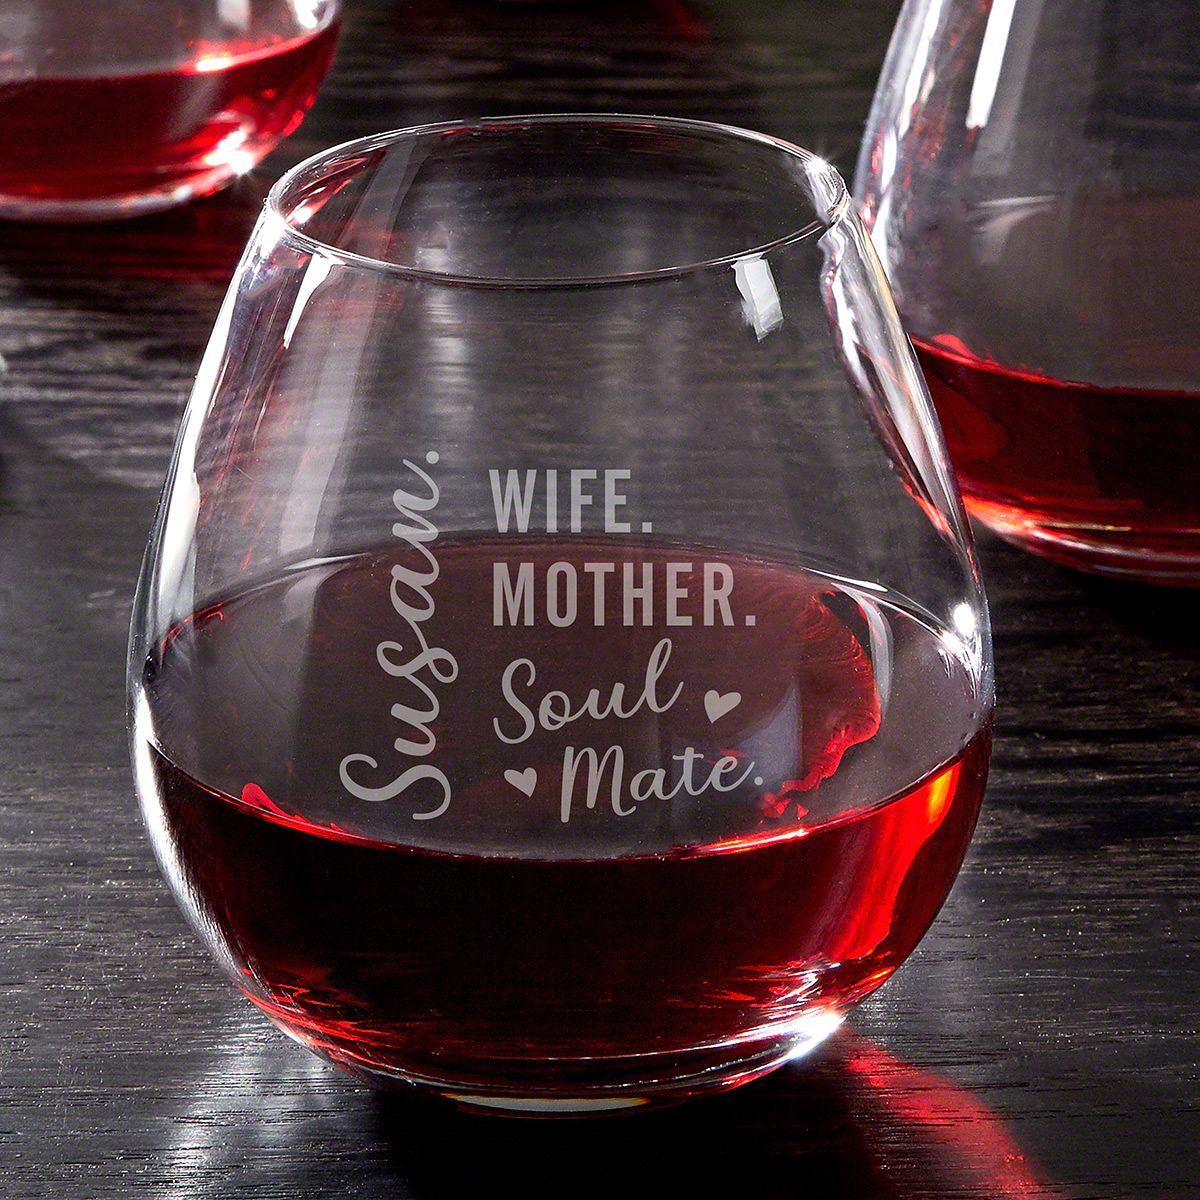 The perfect gift for a wife who loves wine, she'll be so touched